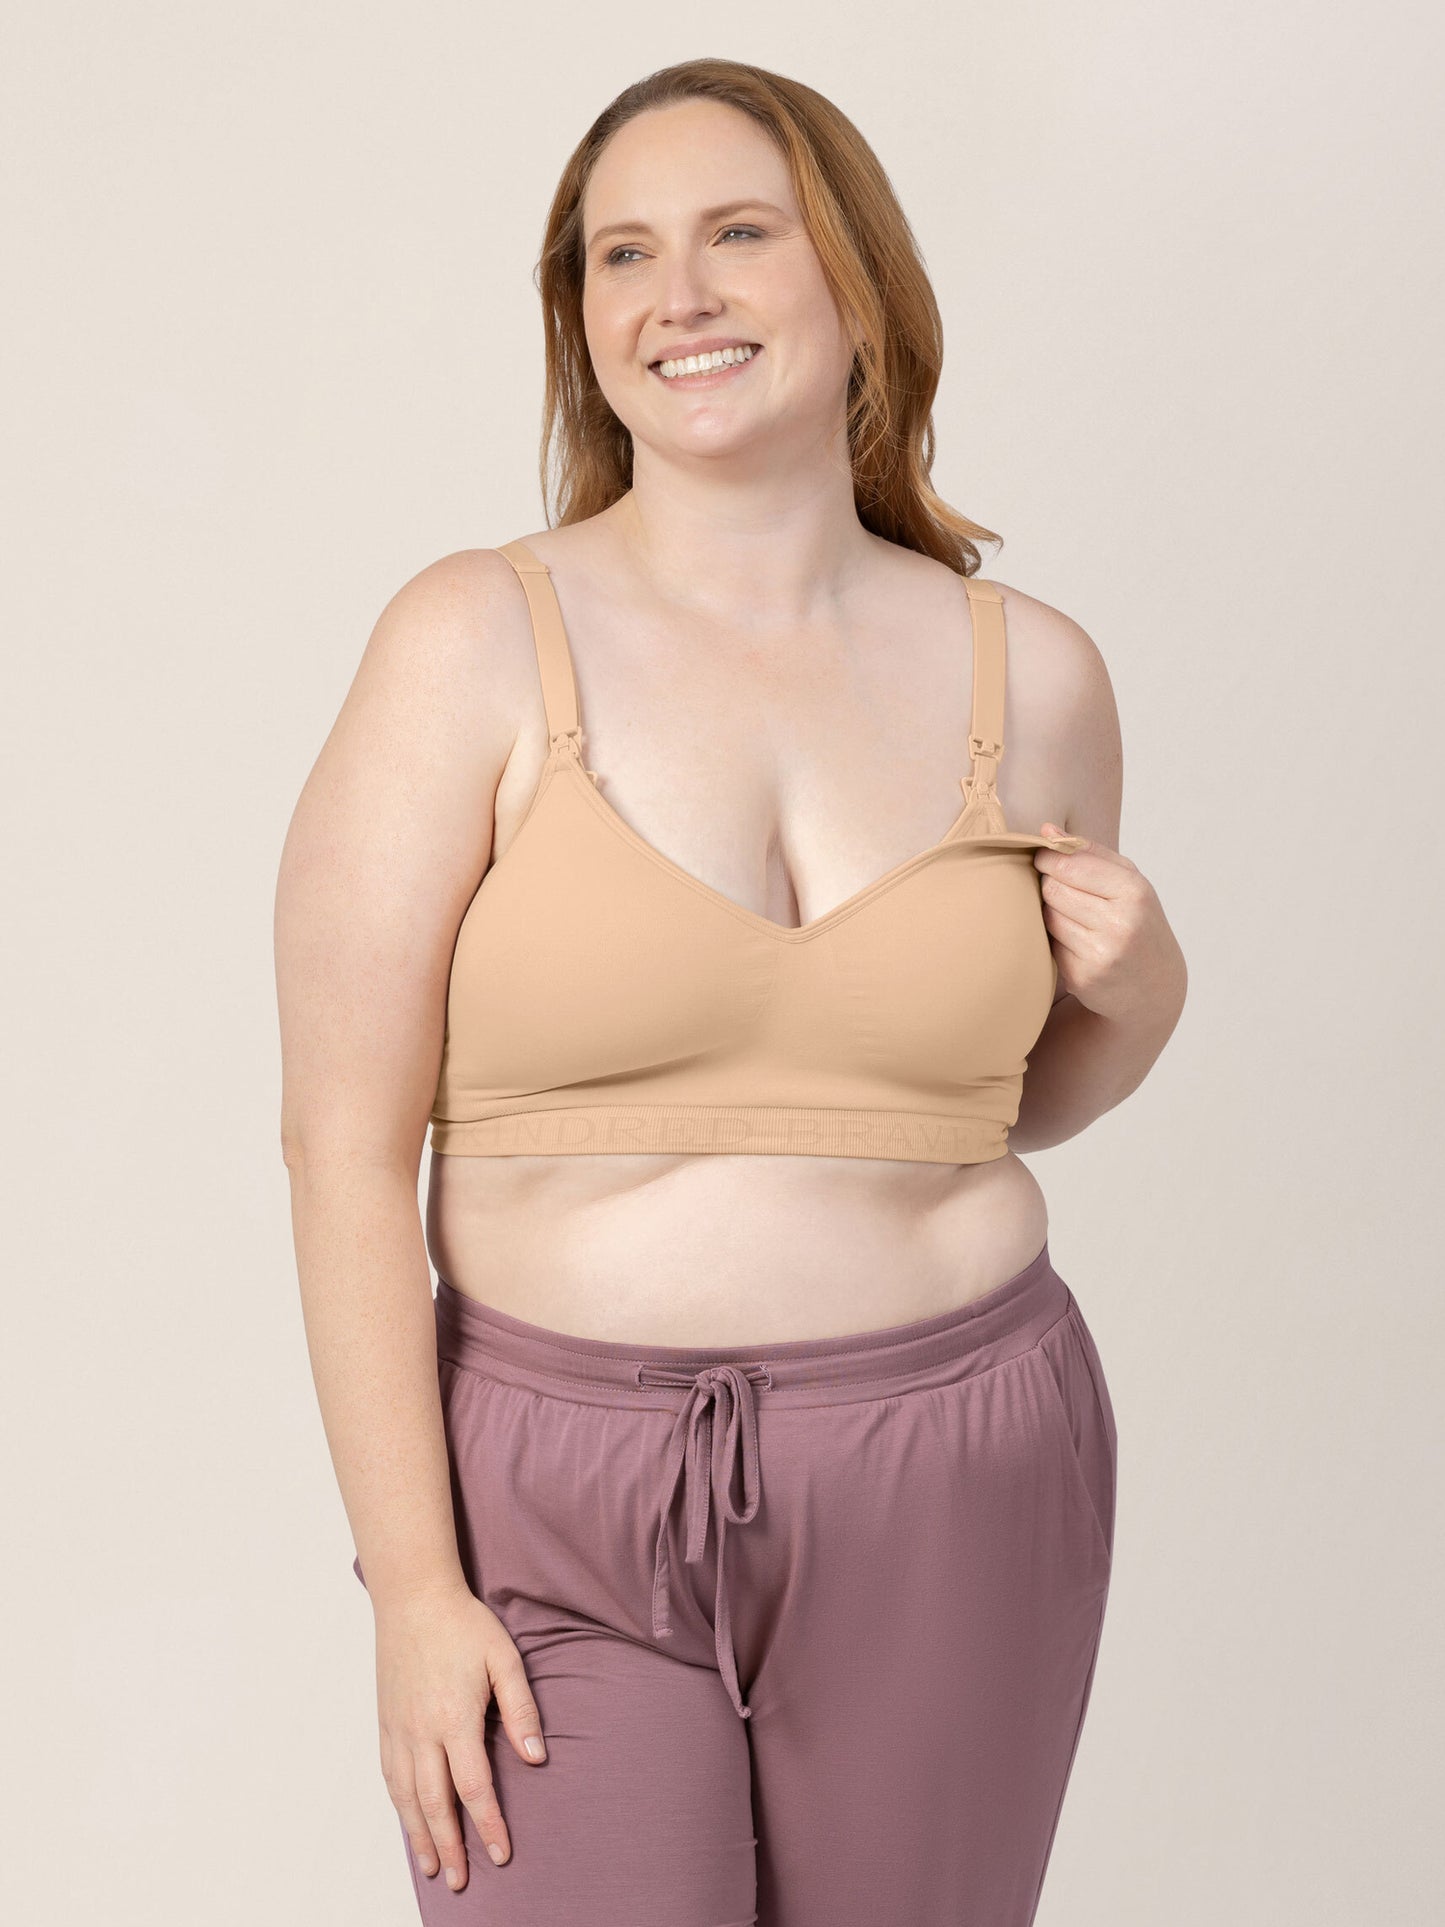 GetUSCart- Kindred Bravely Sublime Hands Free Pumping Bra  Patented  All-in-One Pumping & Nursing Bra with EasyClip (XXX-Large, Beige)